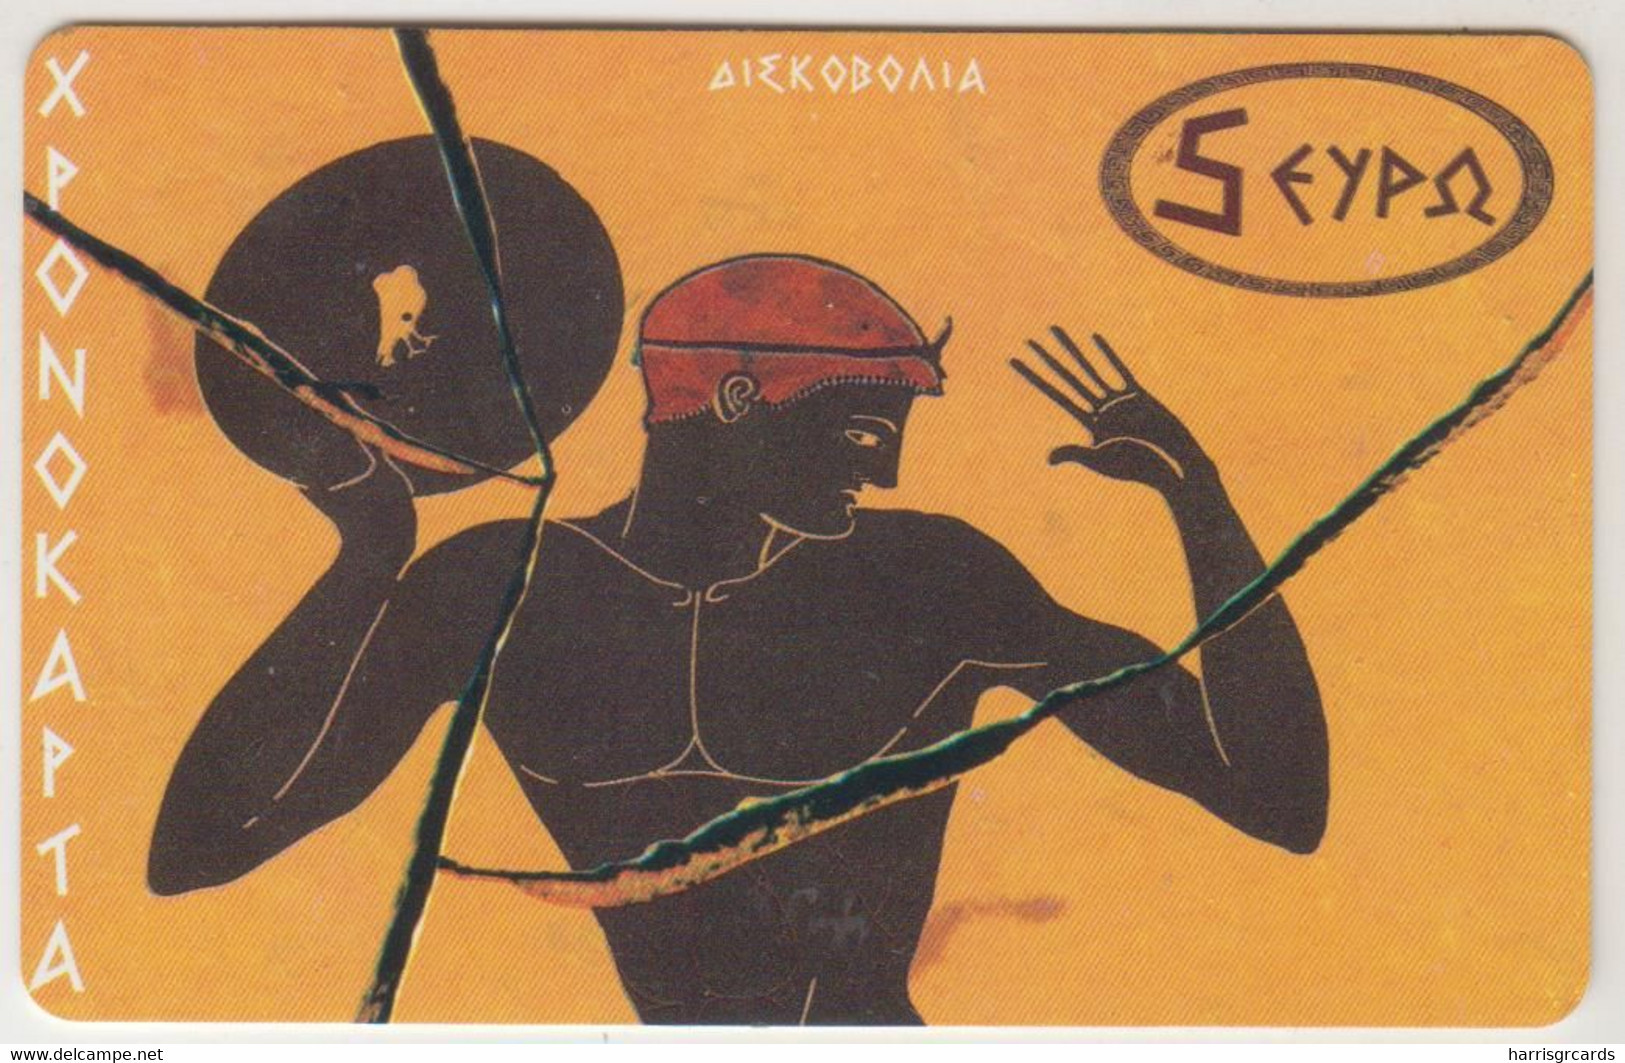 GREECE - Ancient Olympic Competitions 4/40, AMIMEX Prepaid Cards ,CN:AB, 5 €, 08/04, Tirage 5.000, Used - Griechenland